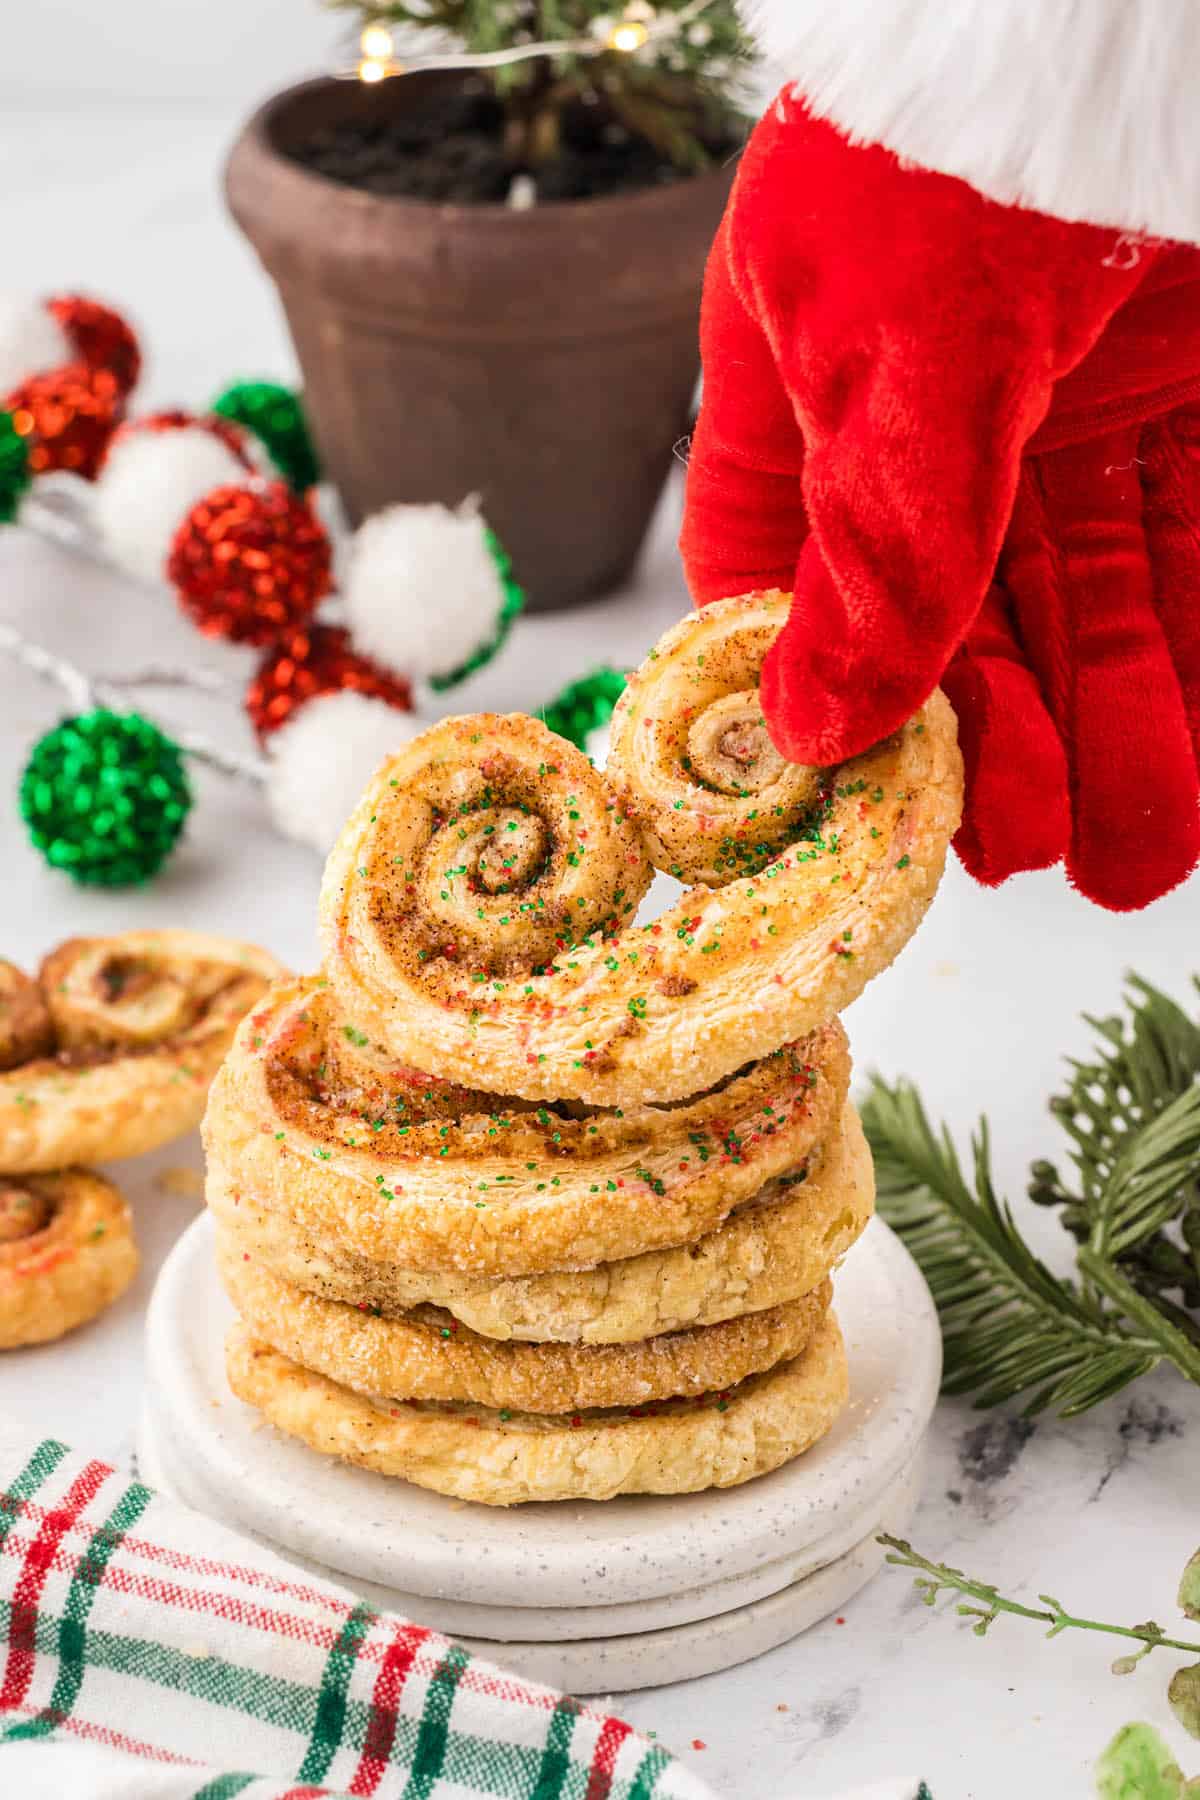 Petite Palmiers stated on a small plate. Santa's glove is reaching down and grabbing a cookie.